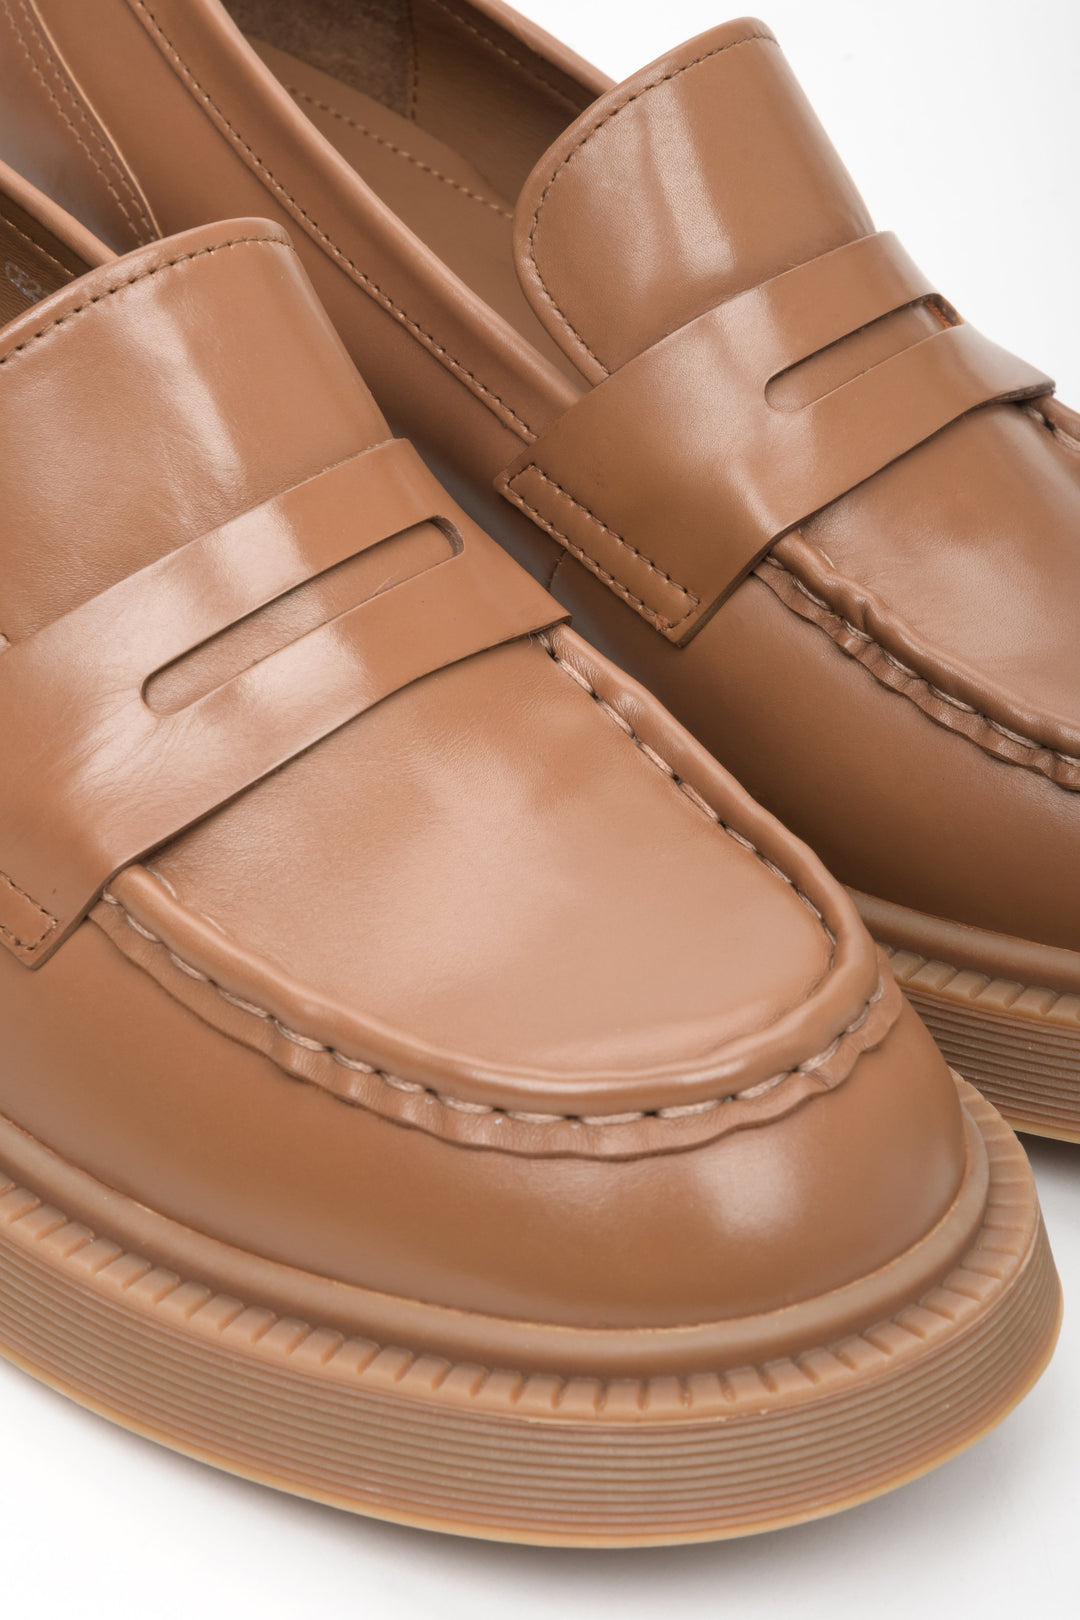 Women's moccasins made of genuine leather in brown by Estro.